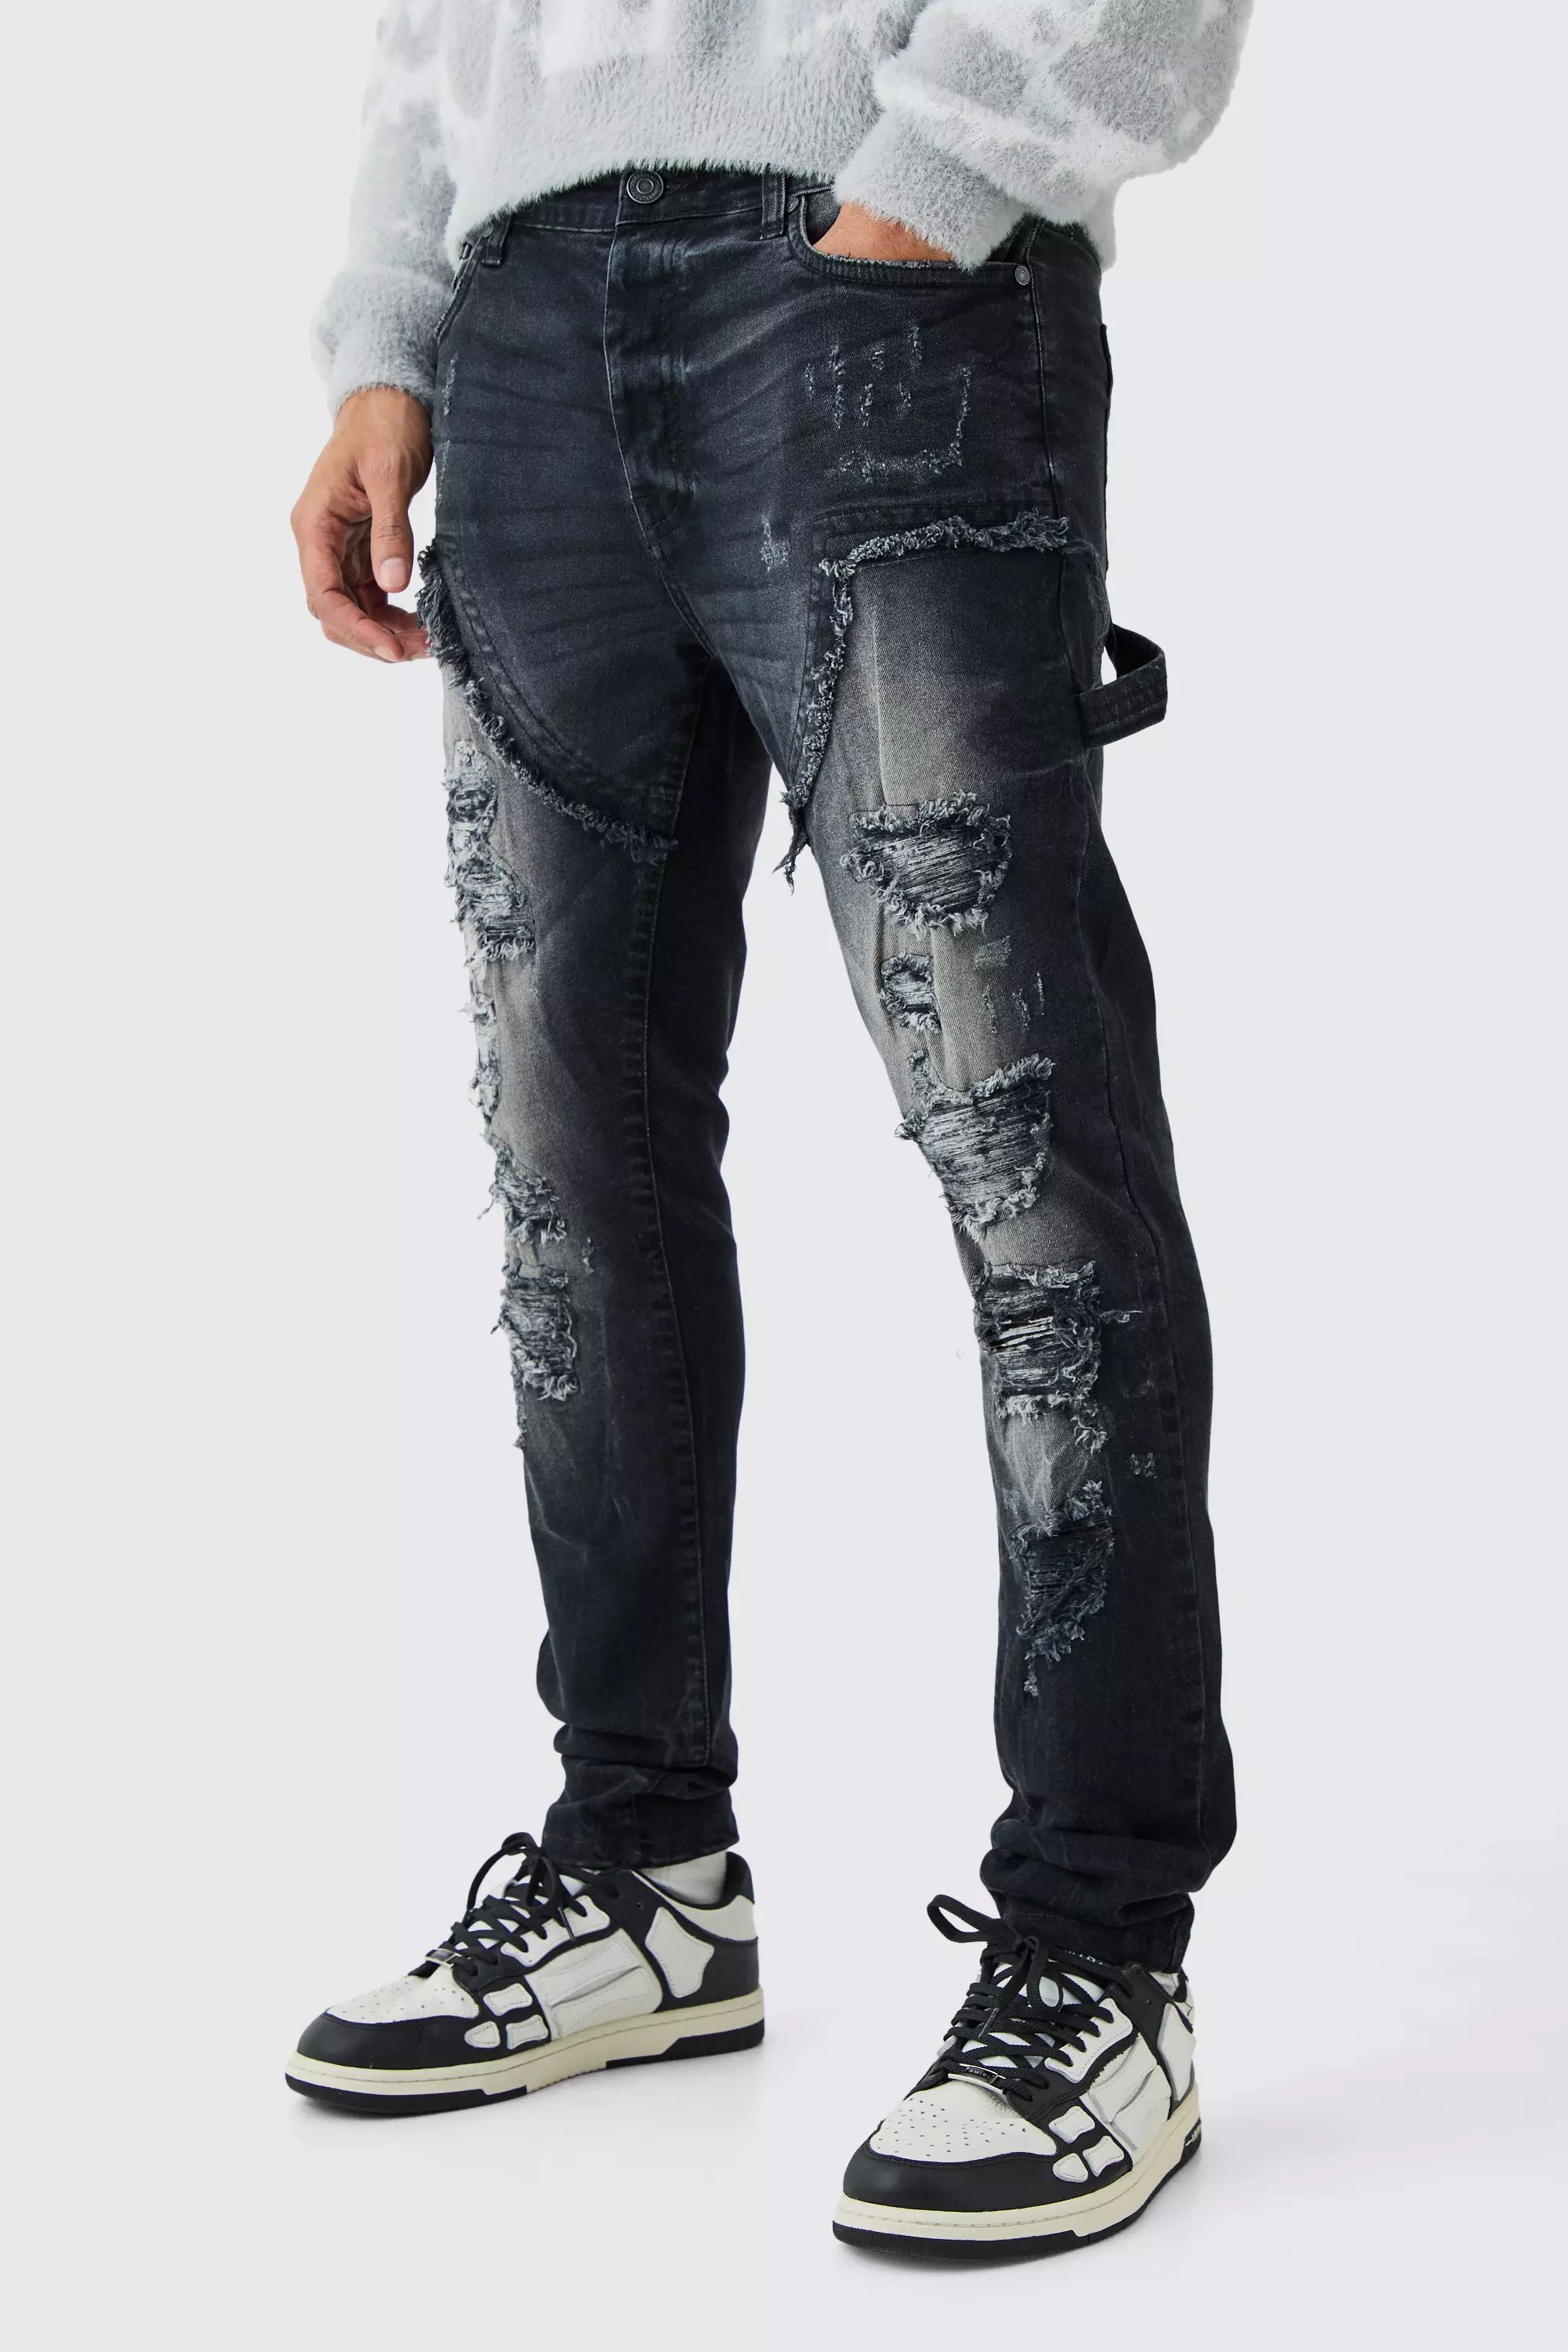 MICKASON Men's Ripped Elasticity Skinny Wild Jeans, Black-2, 38 :  : Clothing, Shoes & Accessories